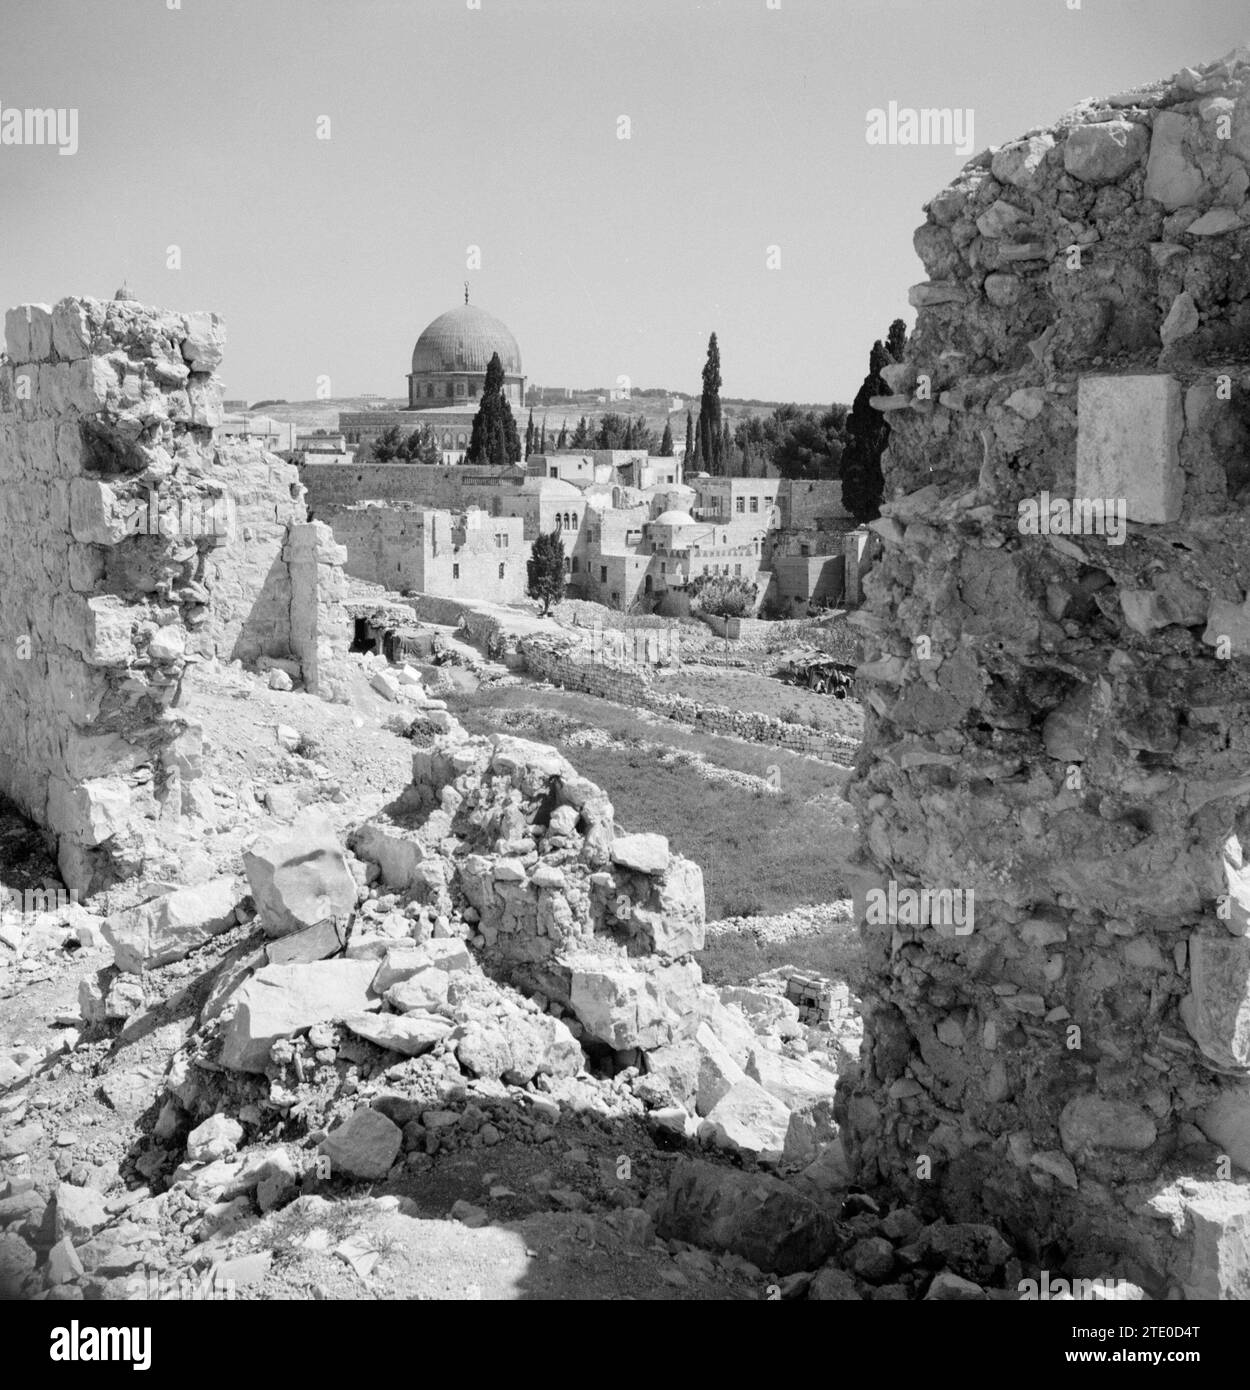 In Jewish quarter. Al Aqsa mosque in the distance. Temple Square in the foreground ca. 1950-1955 Stock Photo